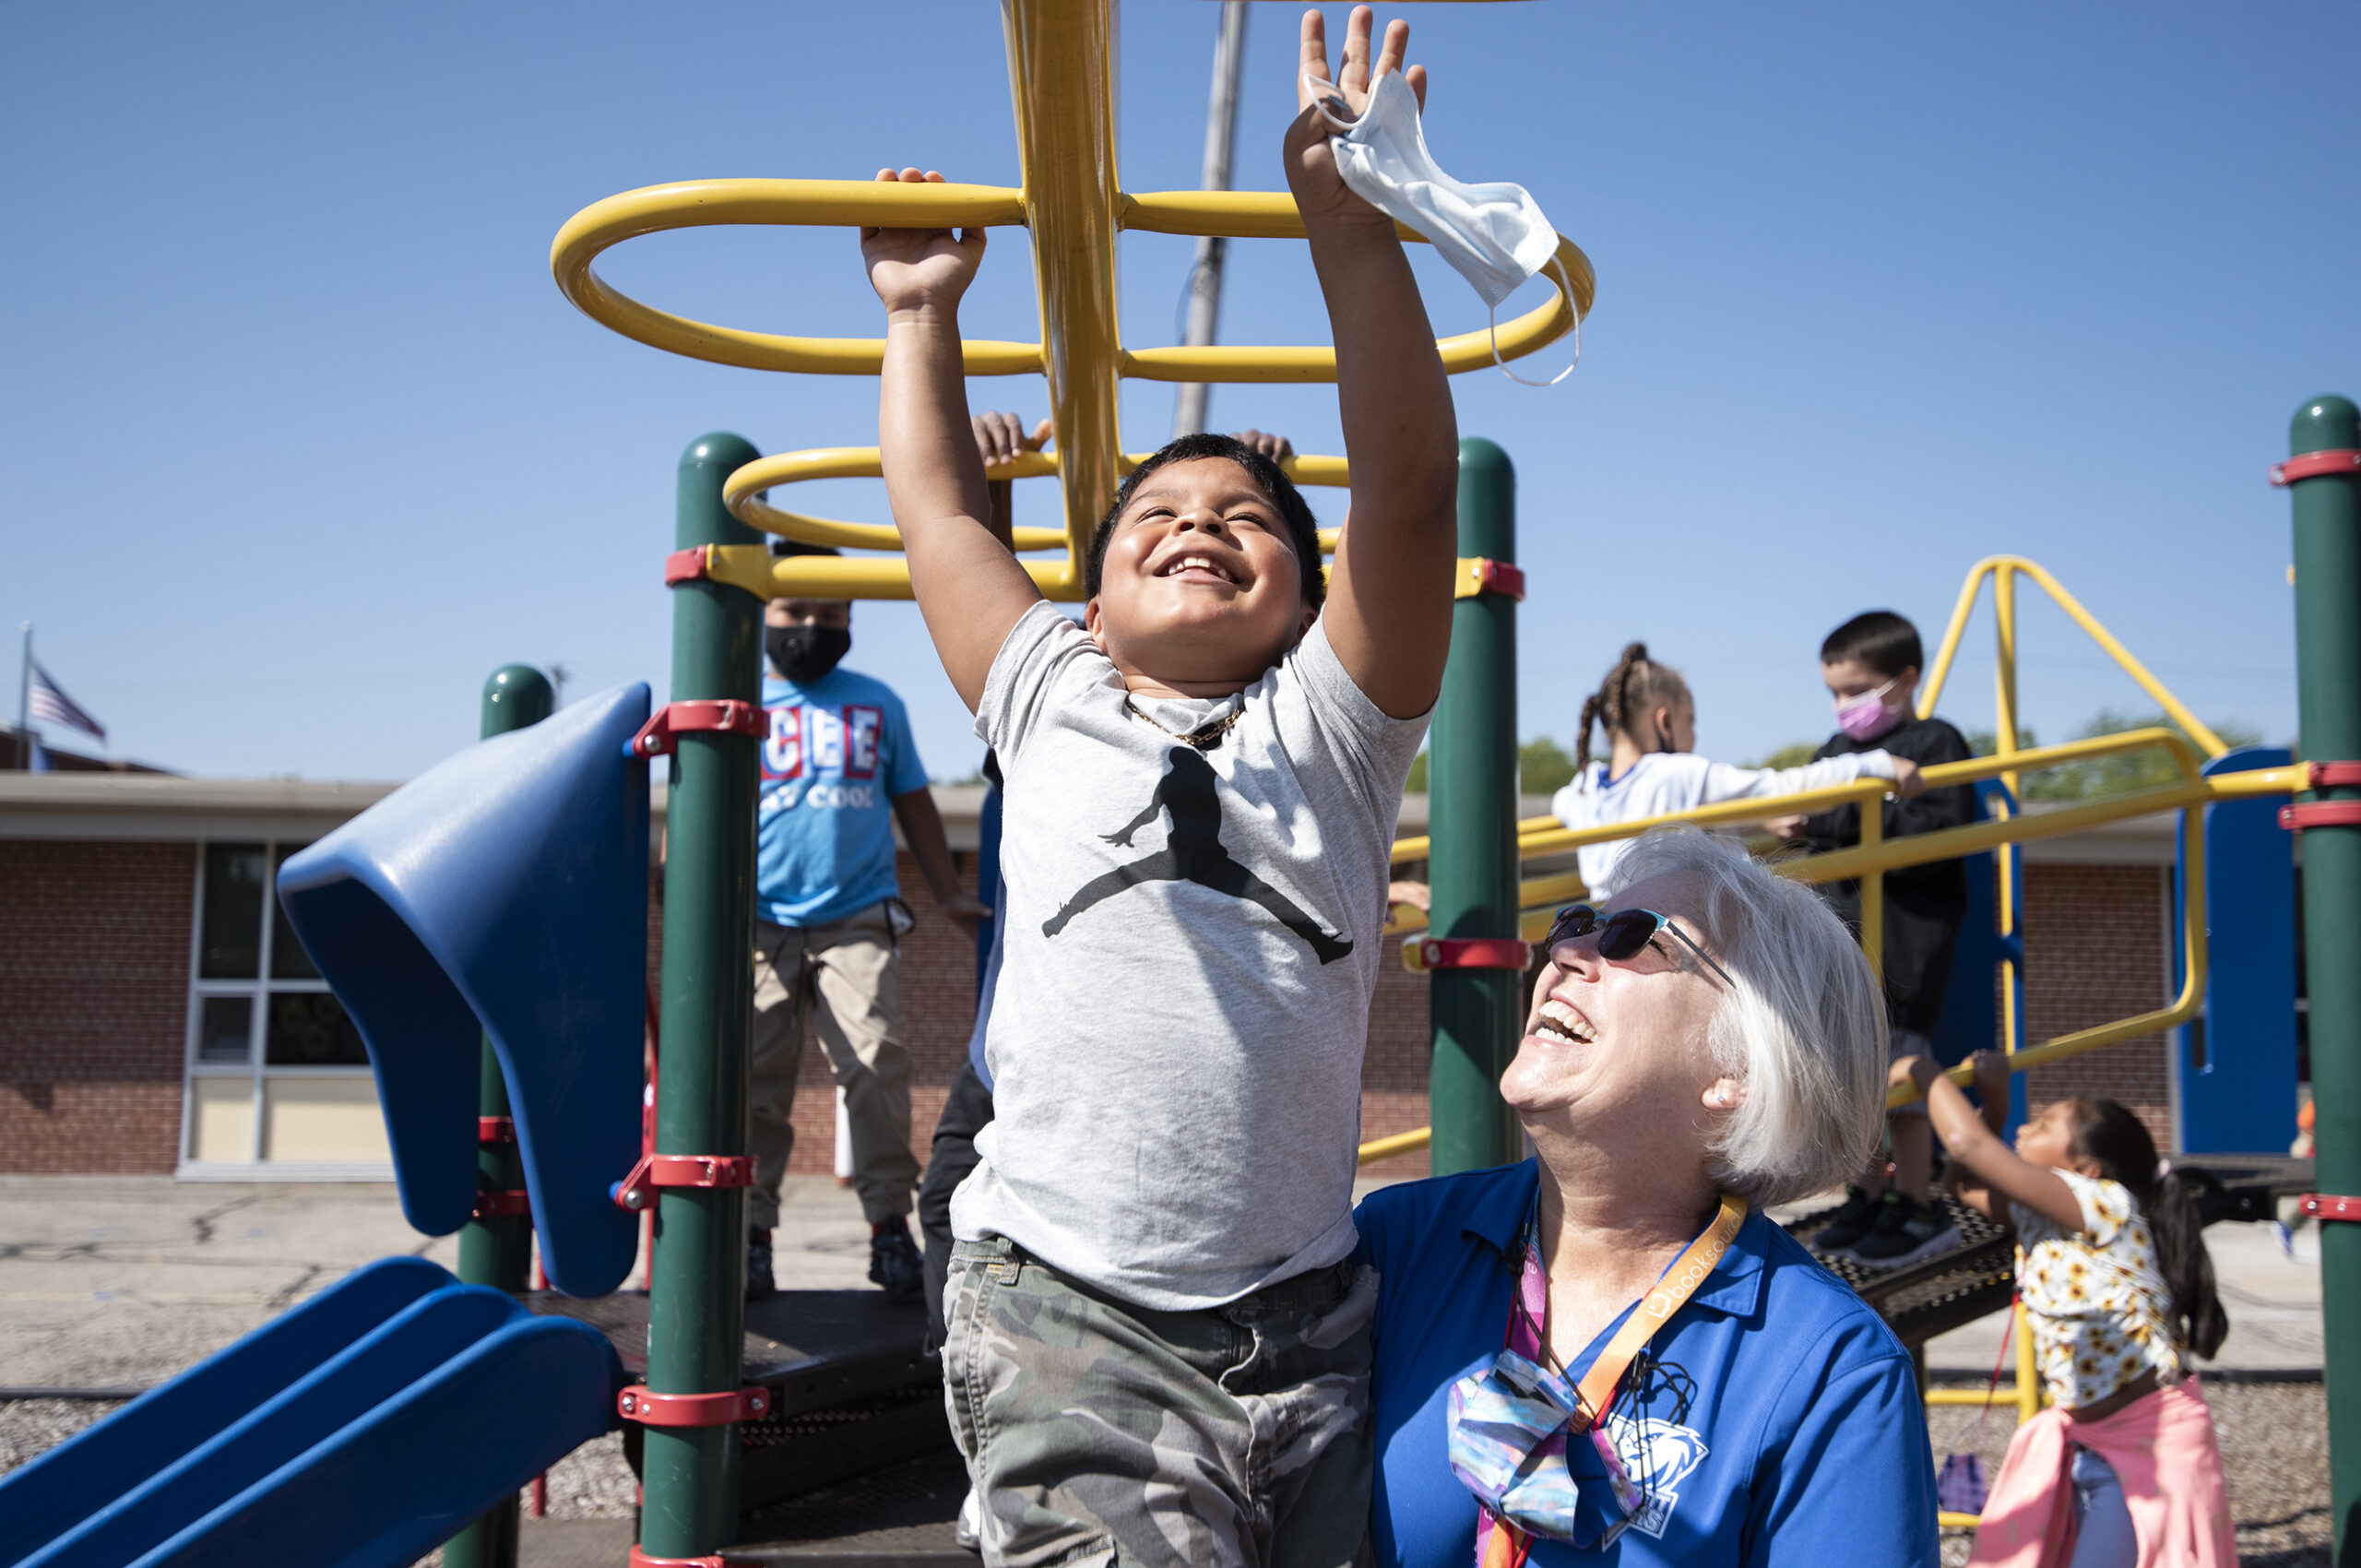 A student smiles as he reaches for the next monkey bar while playing outside on the playground.